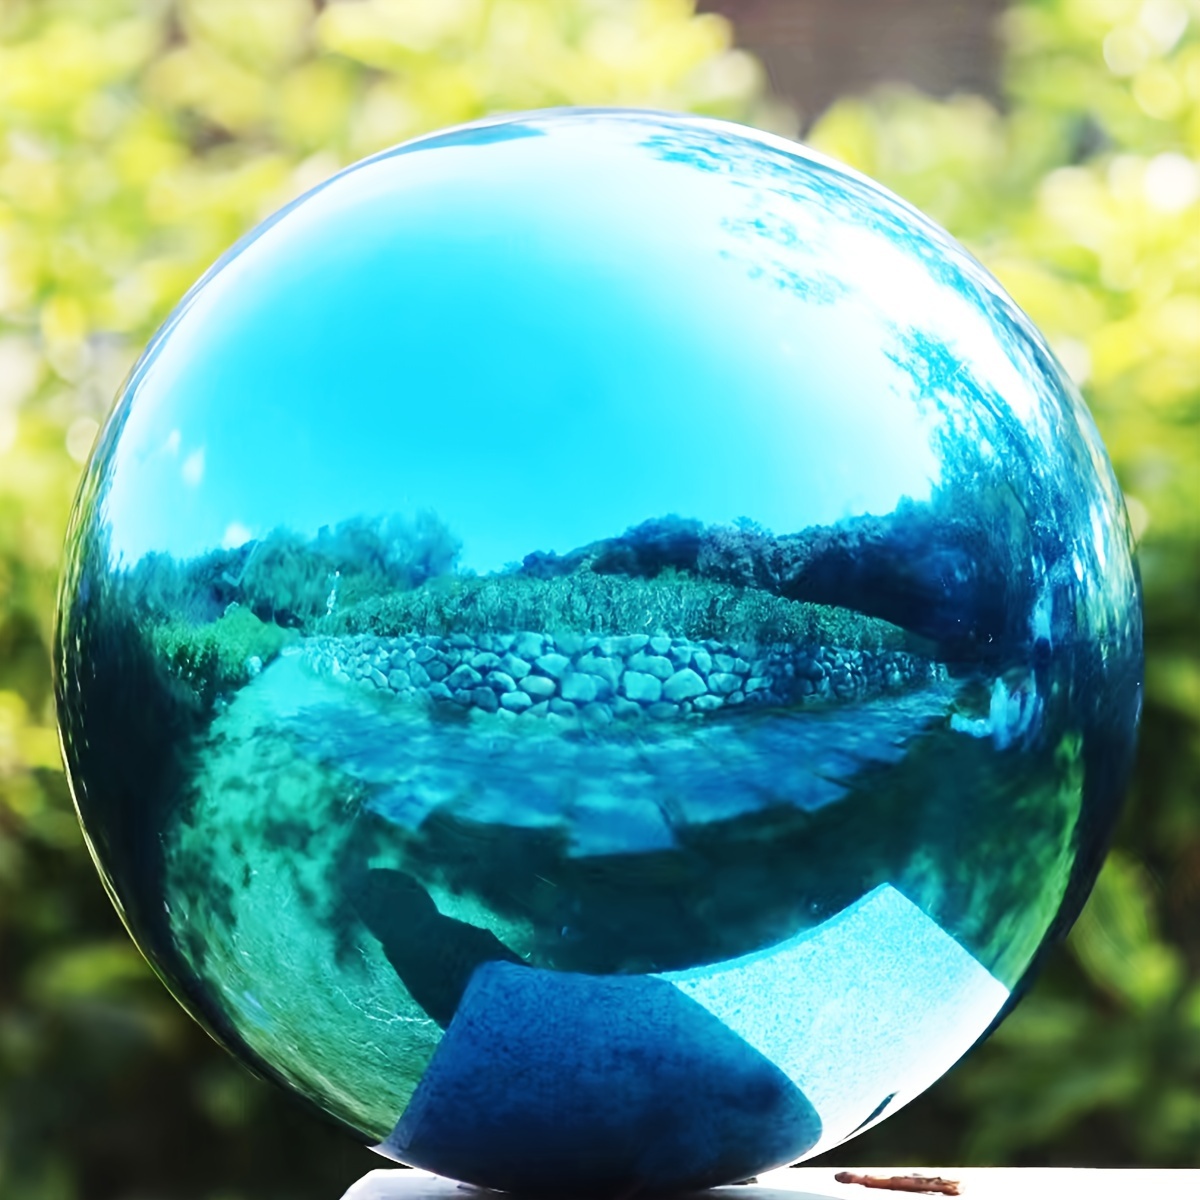 

1pc 10inch Stainless Steel Gazing Ball, Mirror Polished Hollow Seamless Gazing Globe Reflective Garden Sphere Floating Pond Balls For Home Garden Ornament Decoration